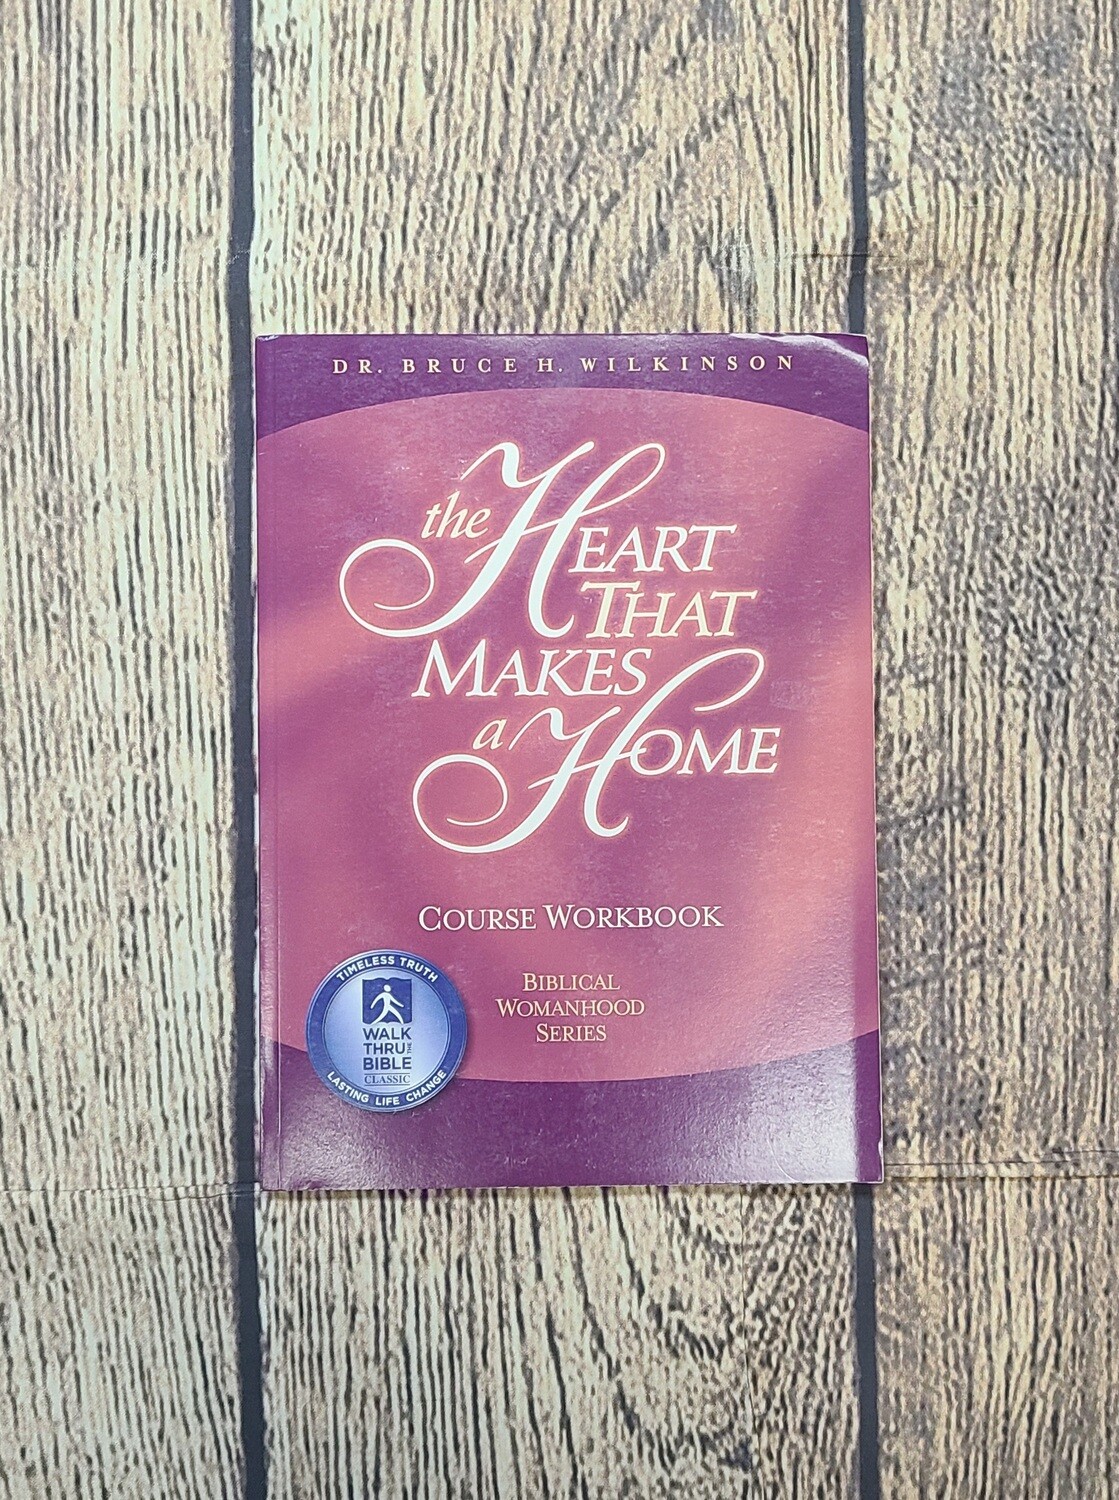 The Heart That Makes a Home: Course Workbook by Dr. Bruce H. Wilkinson